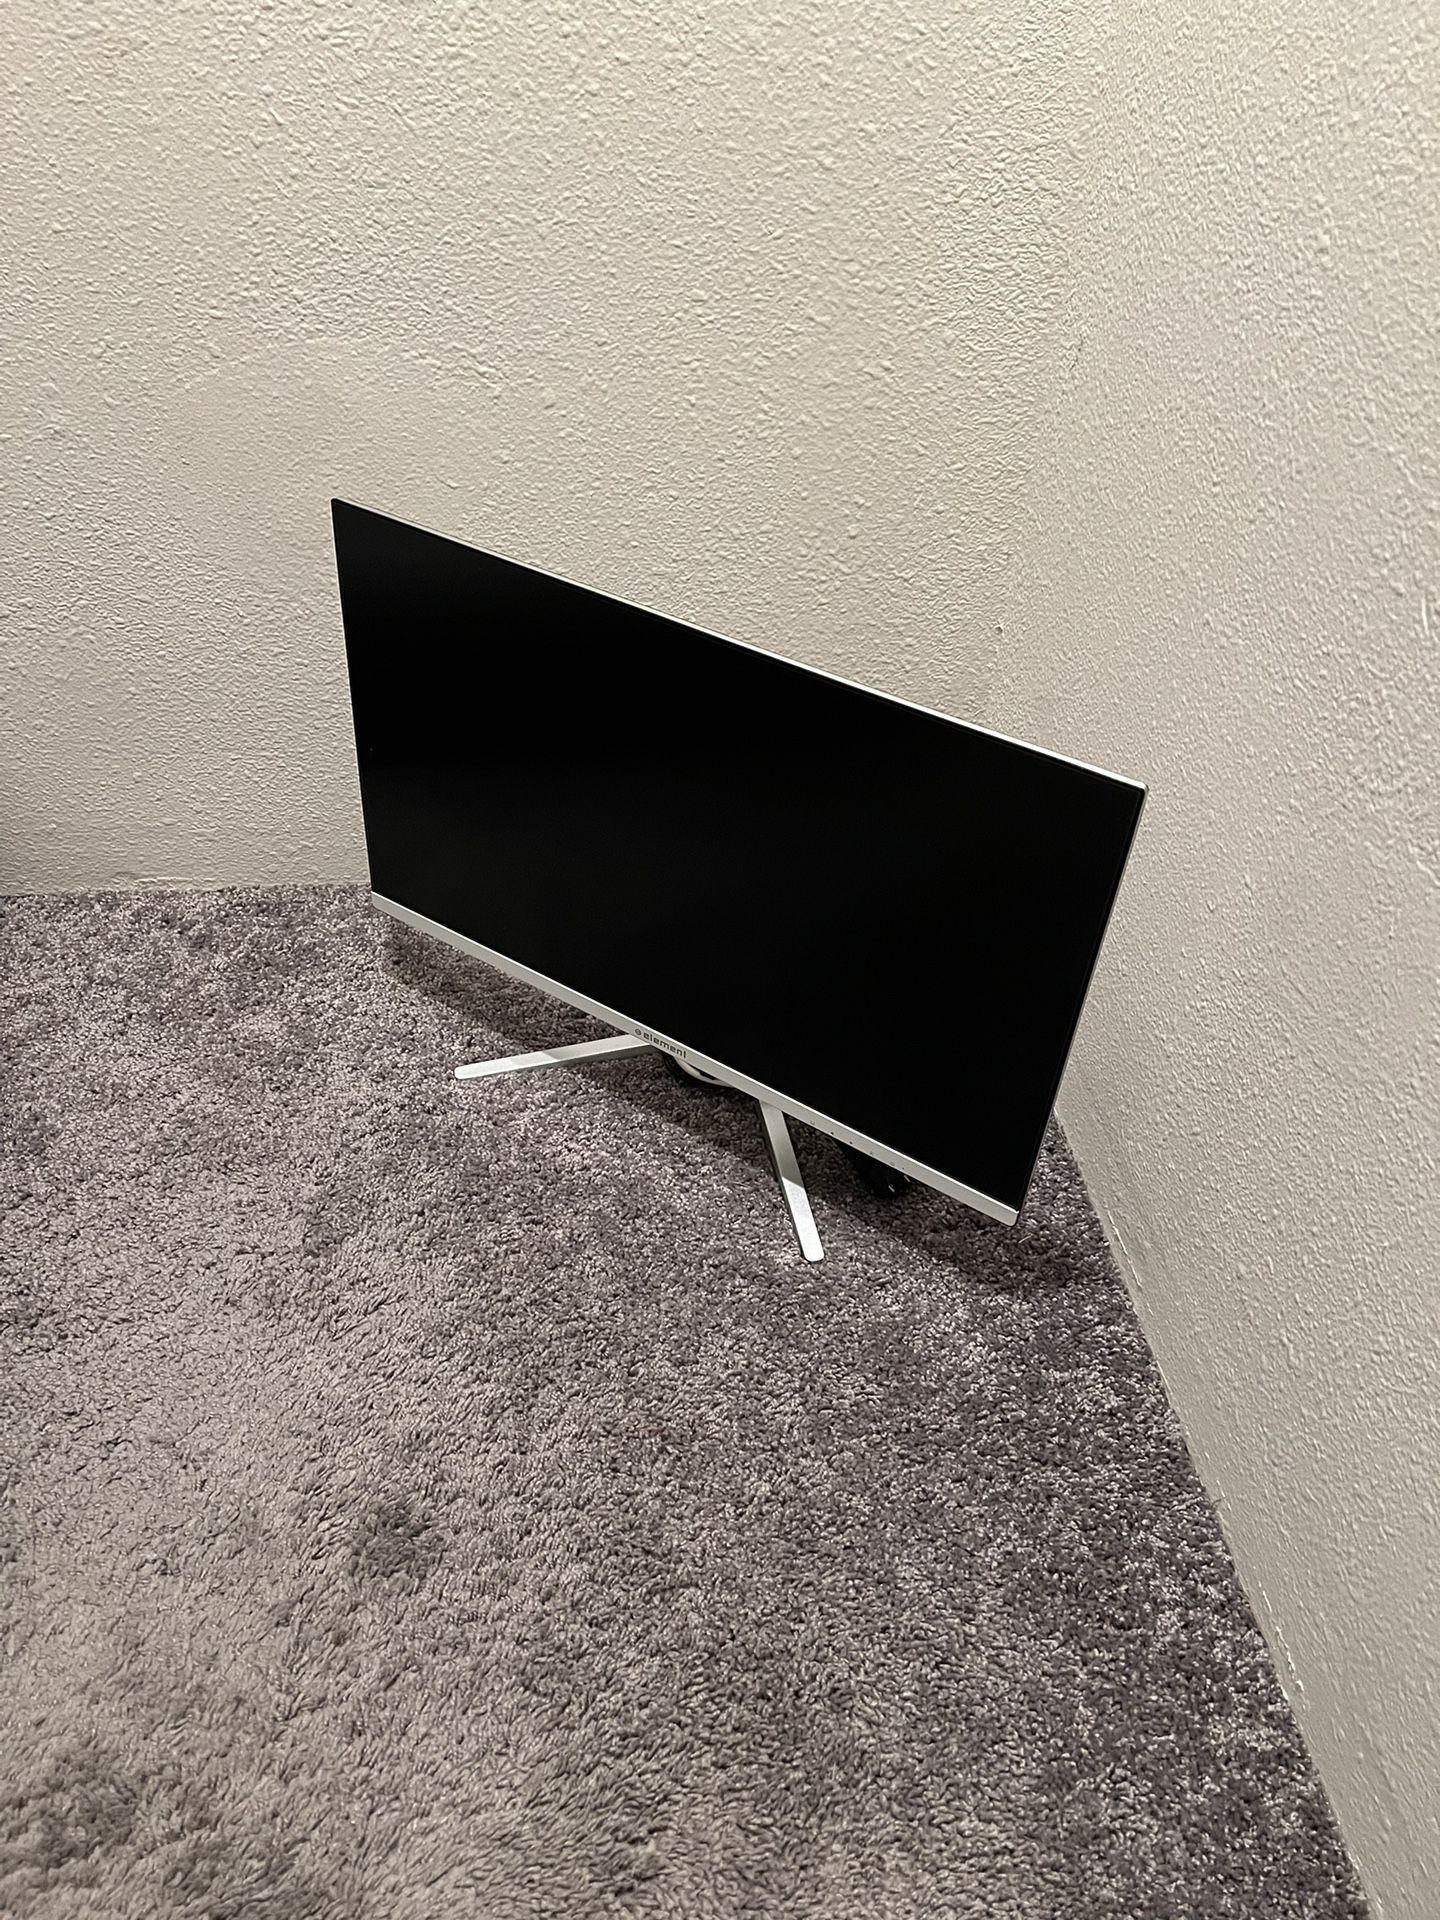 19 Inches Computer Monitor